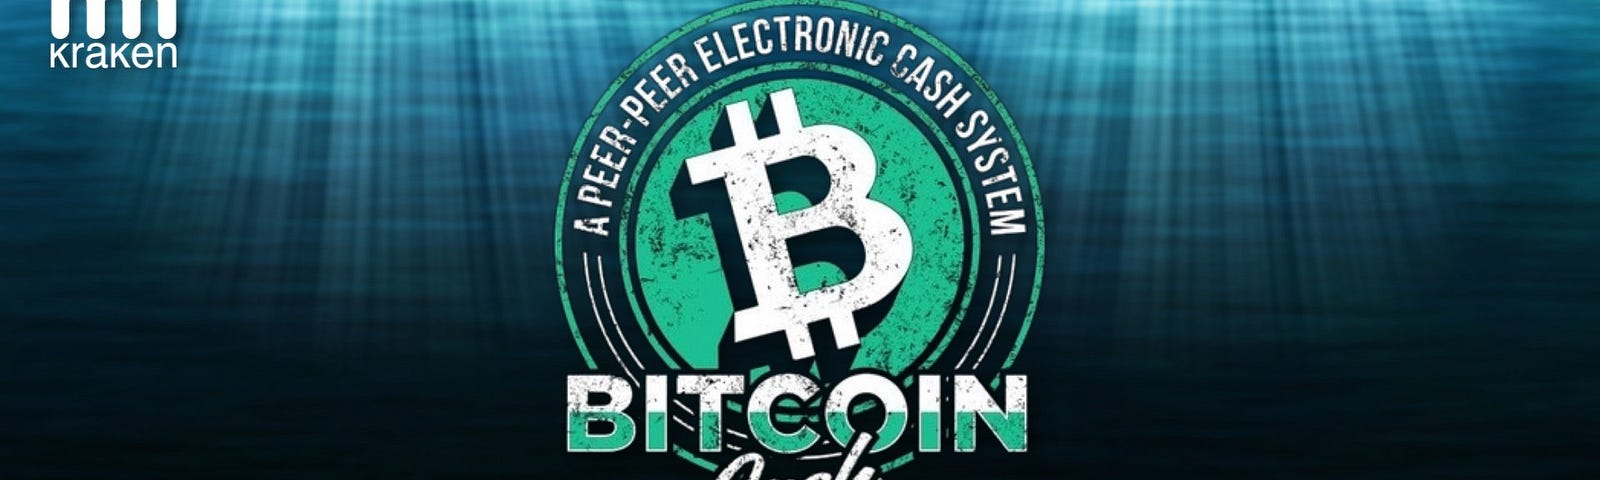 Light blue background on top getting darker at the bottom (looking like an image taken inside the sea) with a custom made Bitcoin Cash logo at the middle.